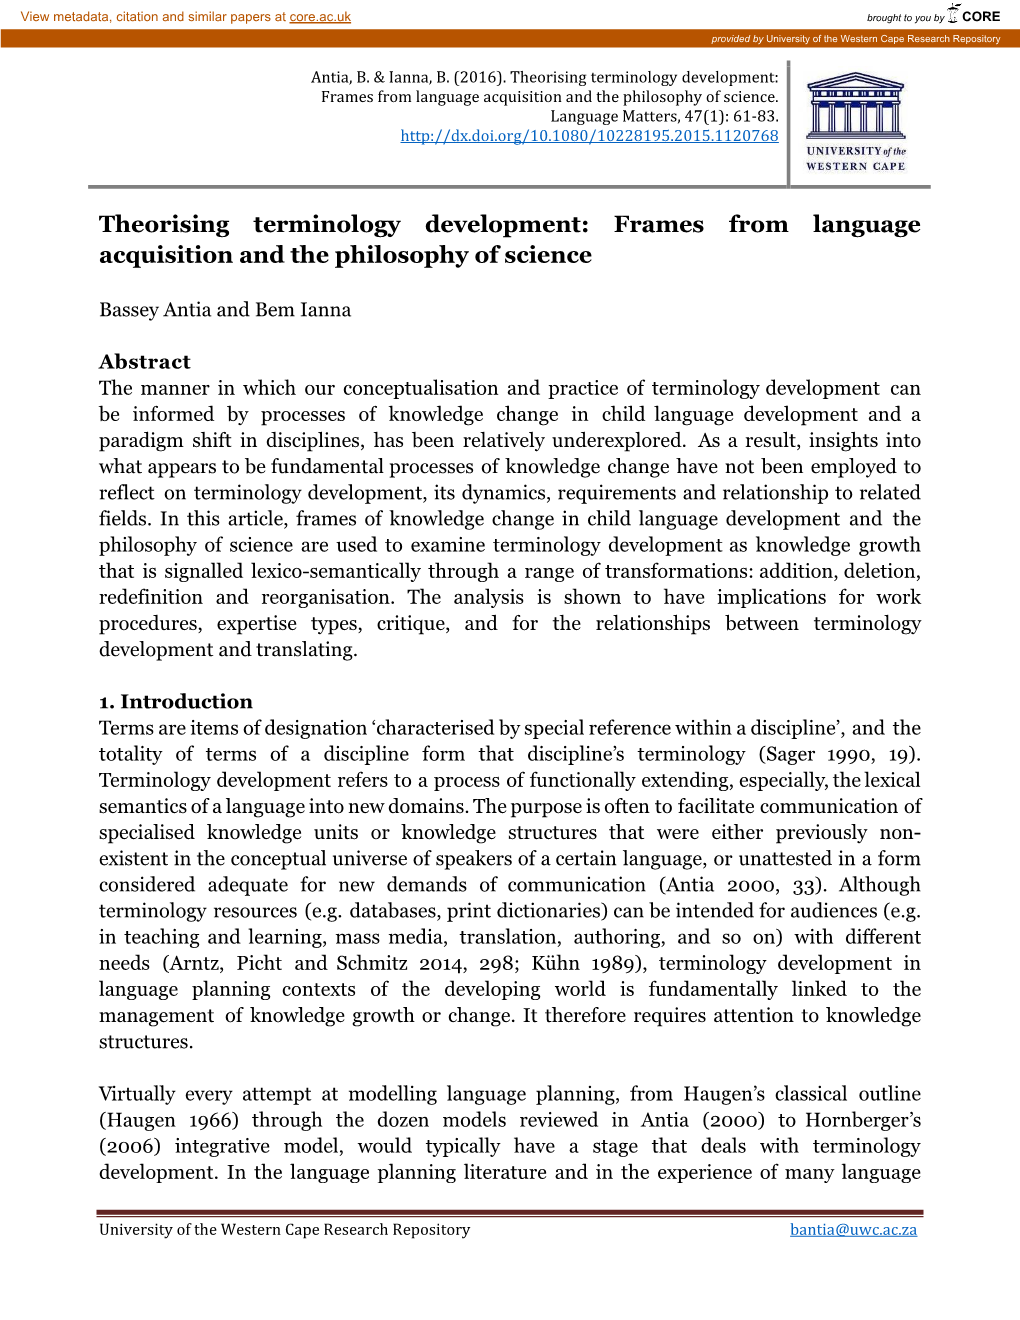 Theorising Terminology Development: Frames from Language Acquisition and the Philosophy of Science